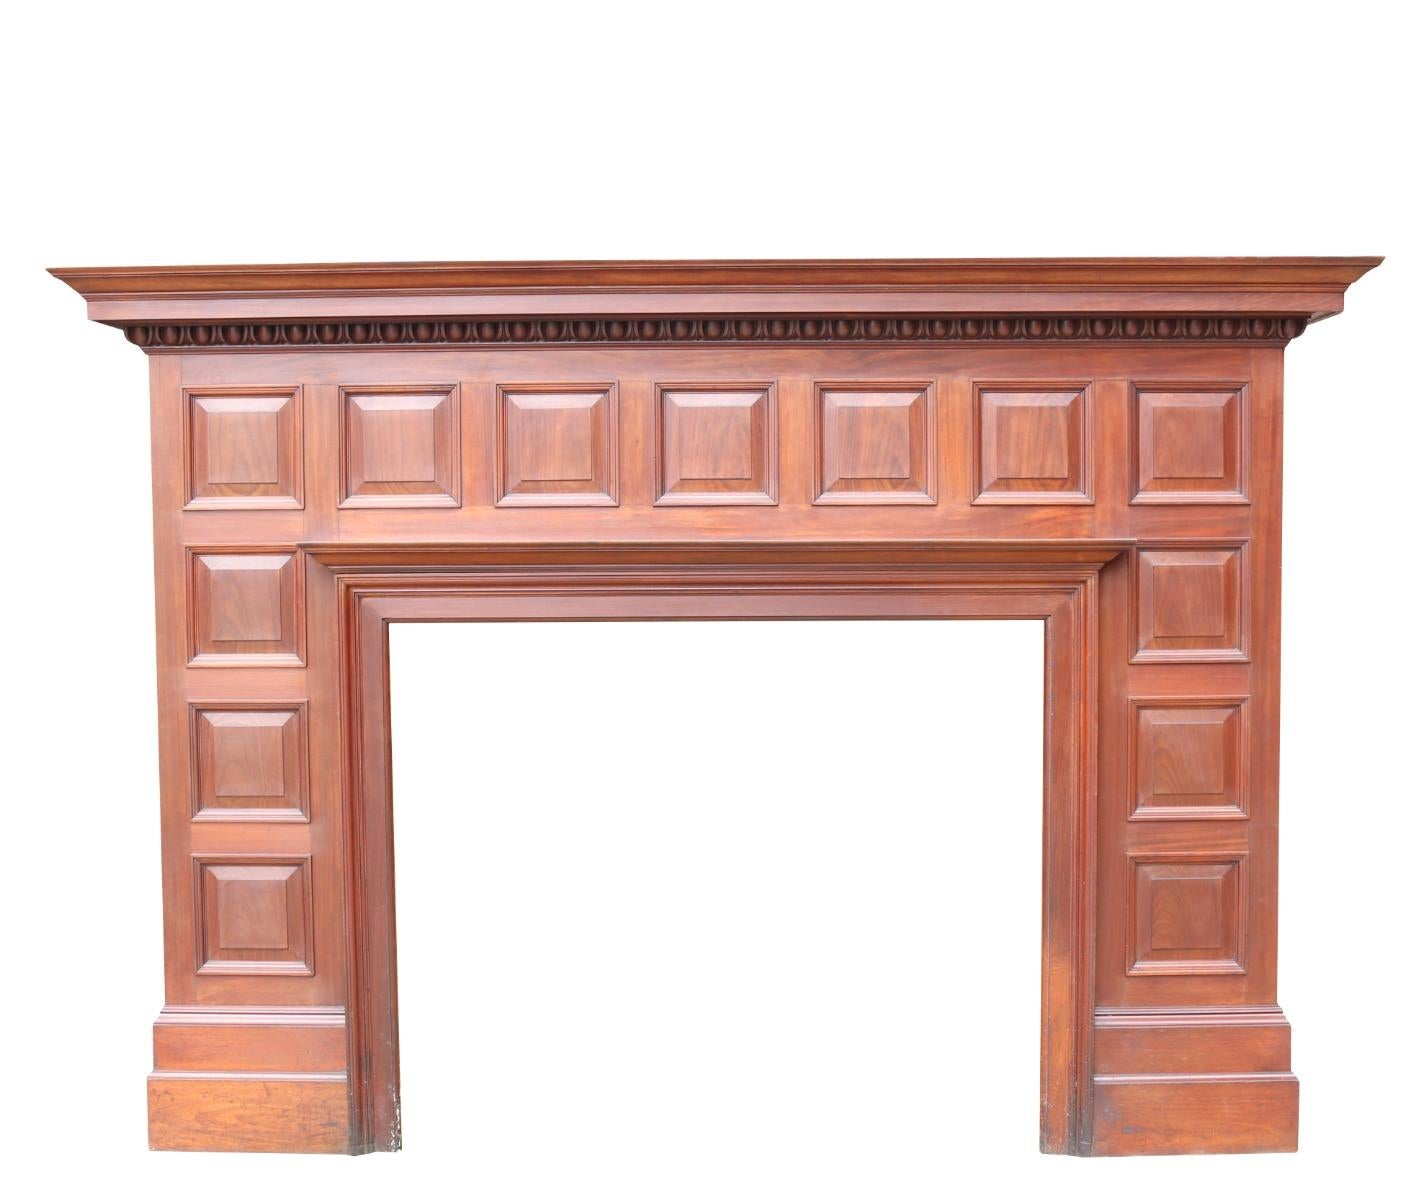 A very good quality English surround. The finish is in excellent condition. Reclaimed from a large country house in Staffordshire.

Measures: Height 188.5 cm

Width 272.5 cm (top) 247.5 cm (base)

Depth 54.5 cm

Opening height 114.5